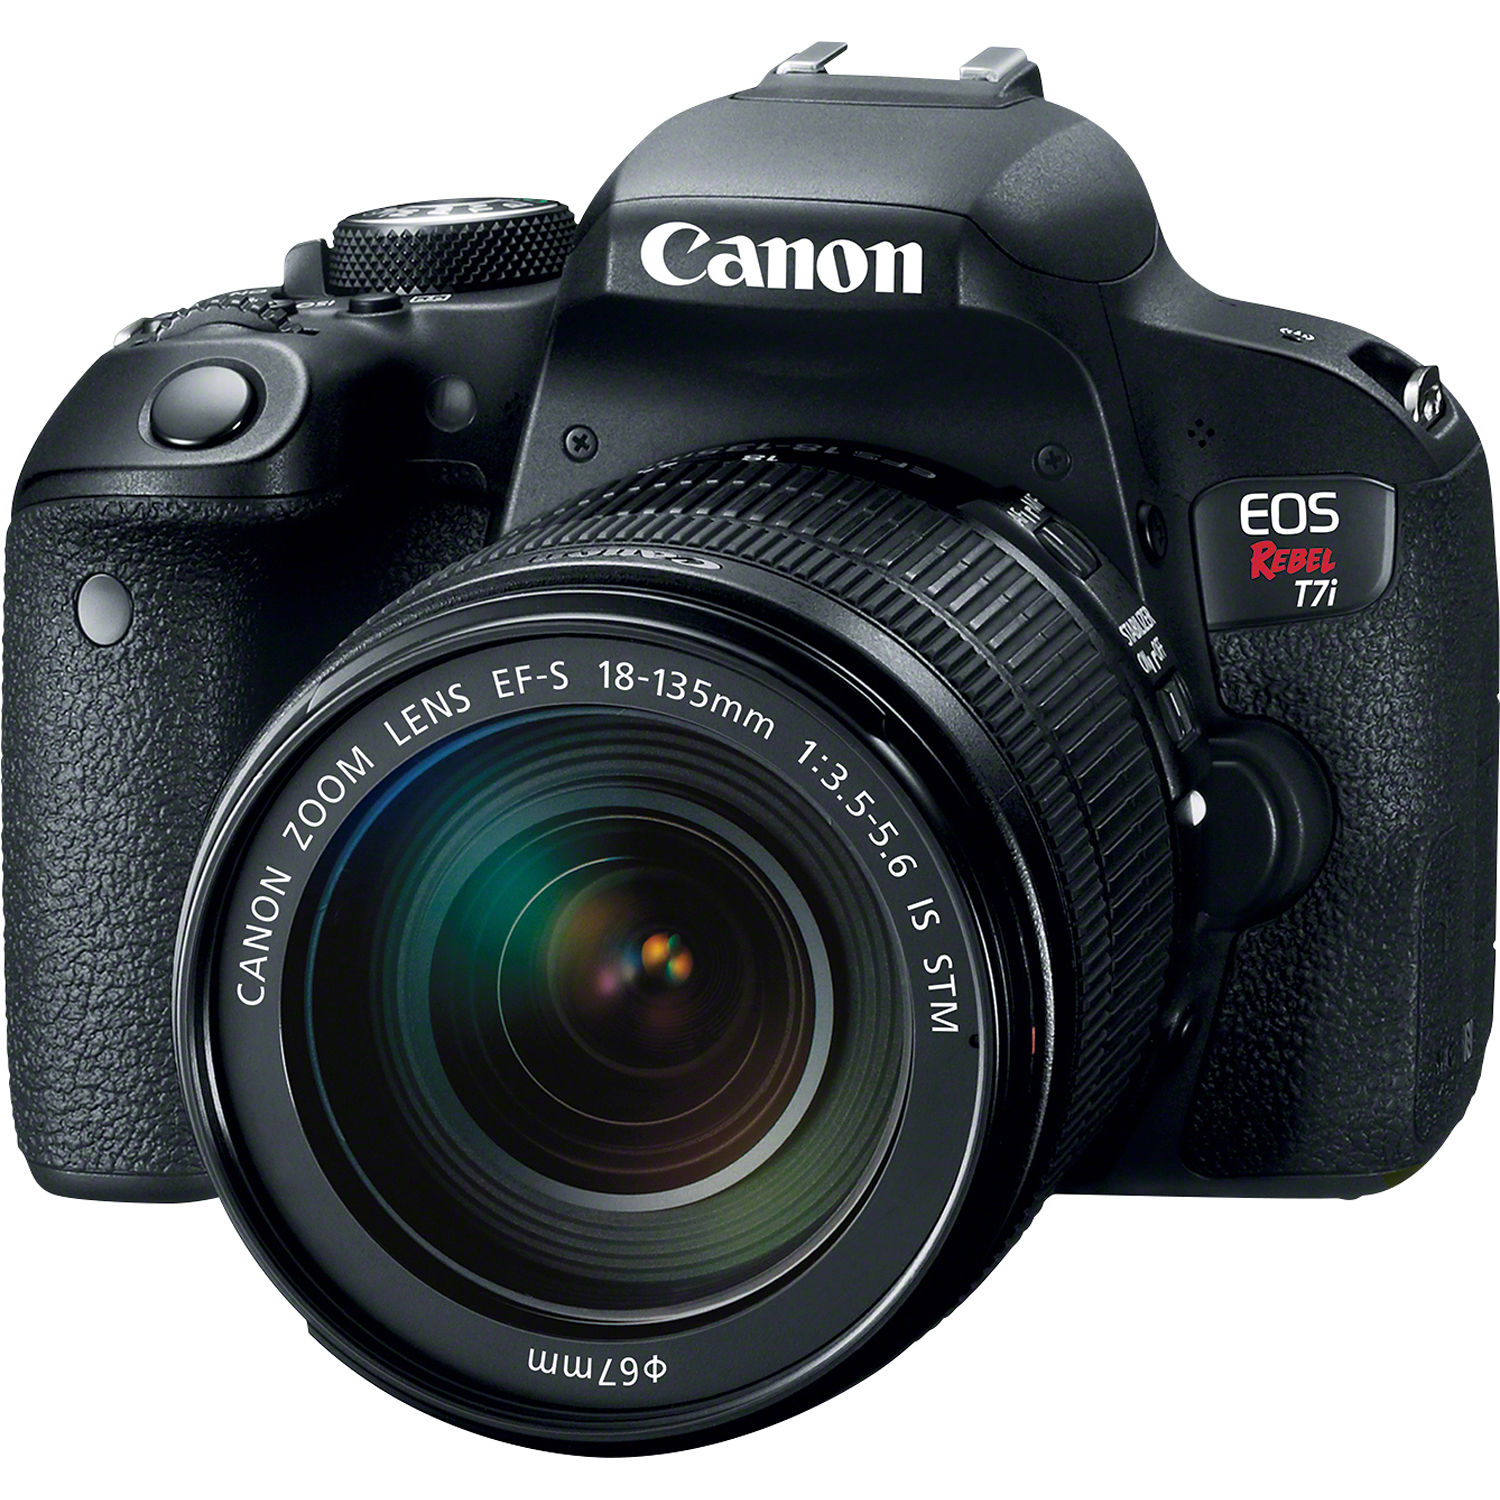 Canon EOS Rebel T7i DSLR Camera with 18-135mm Lens 1894C003 B&H